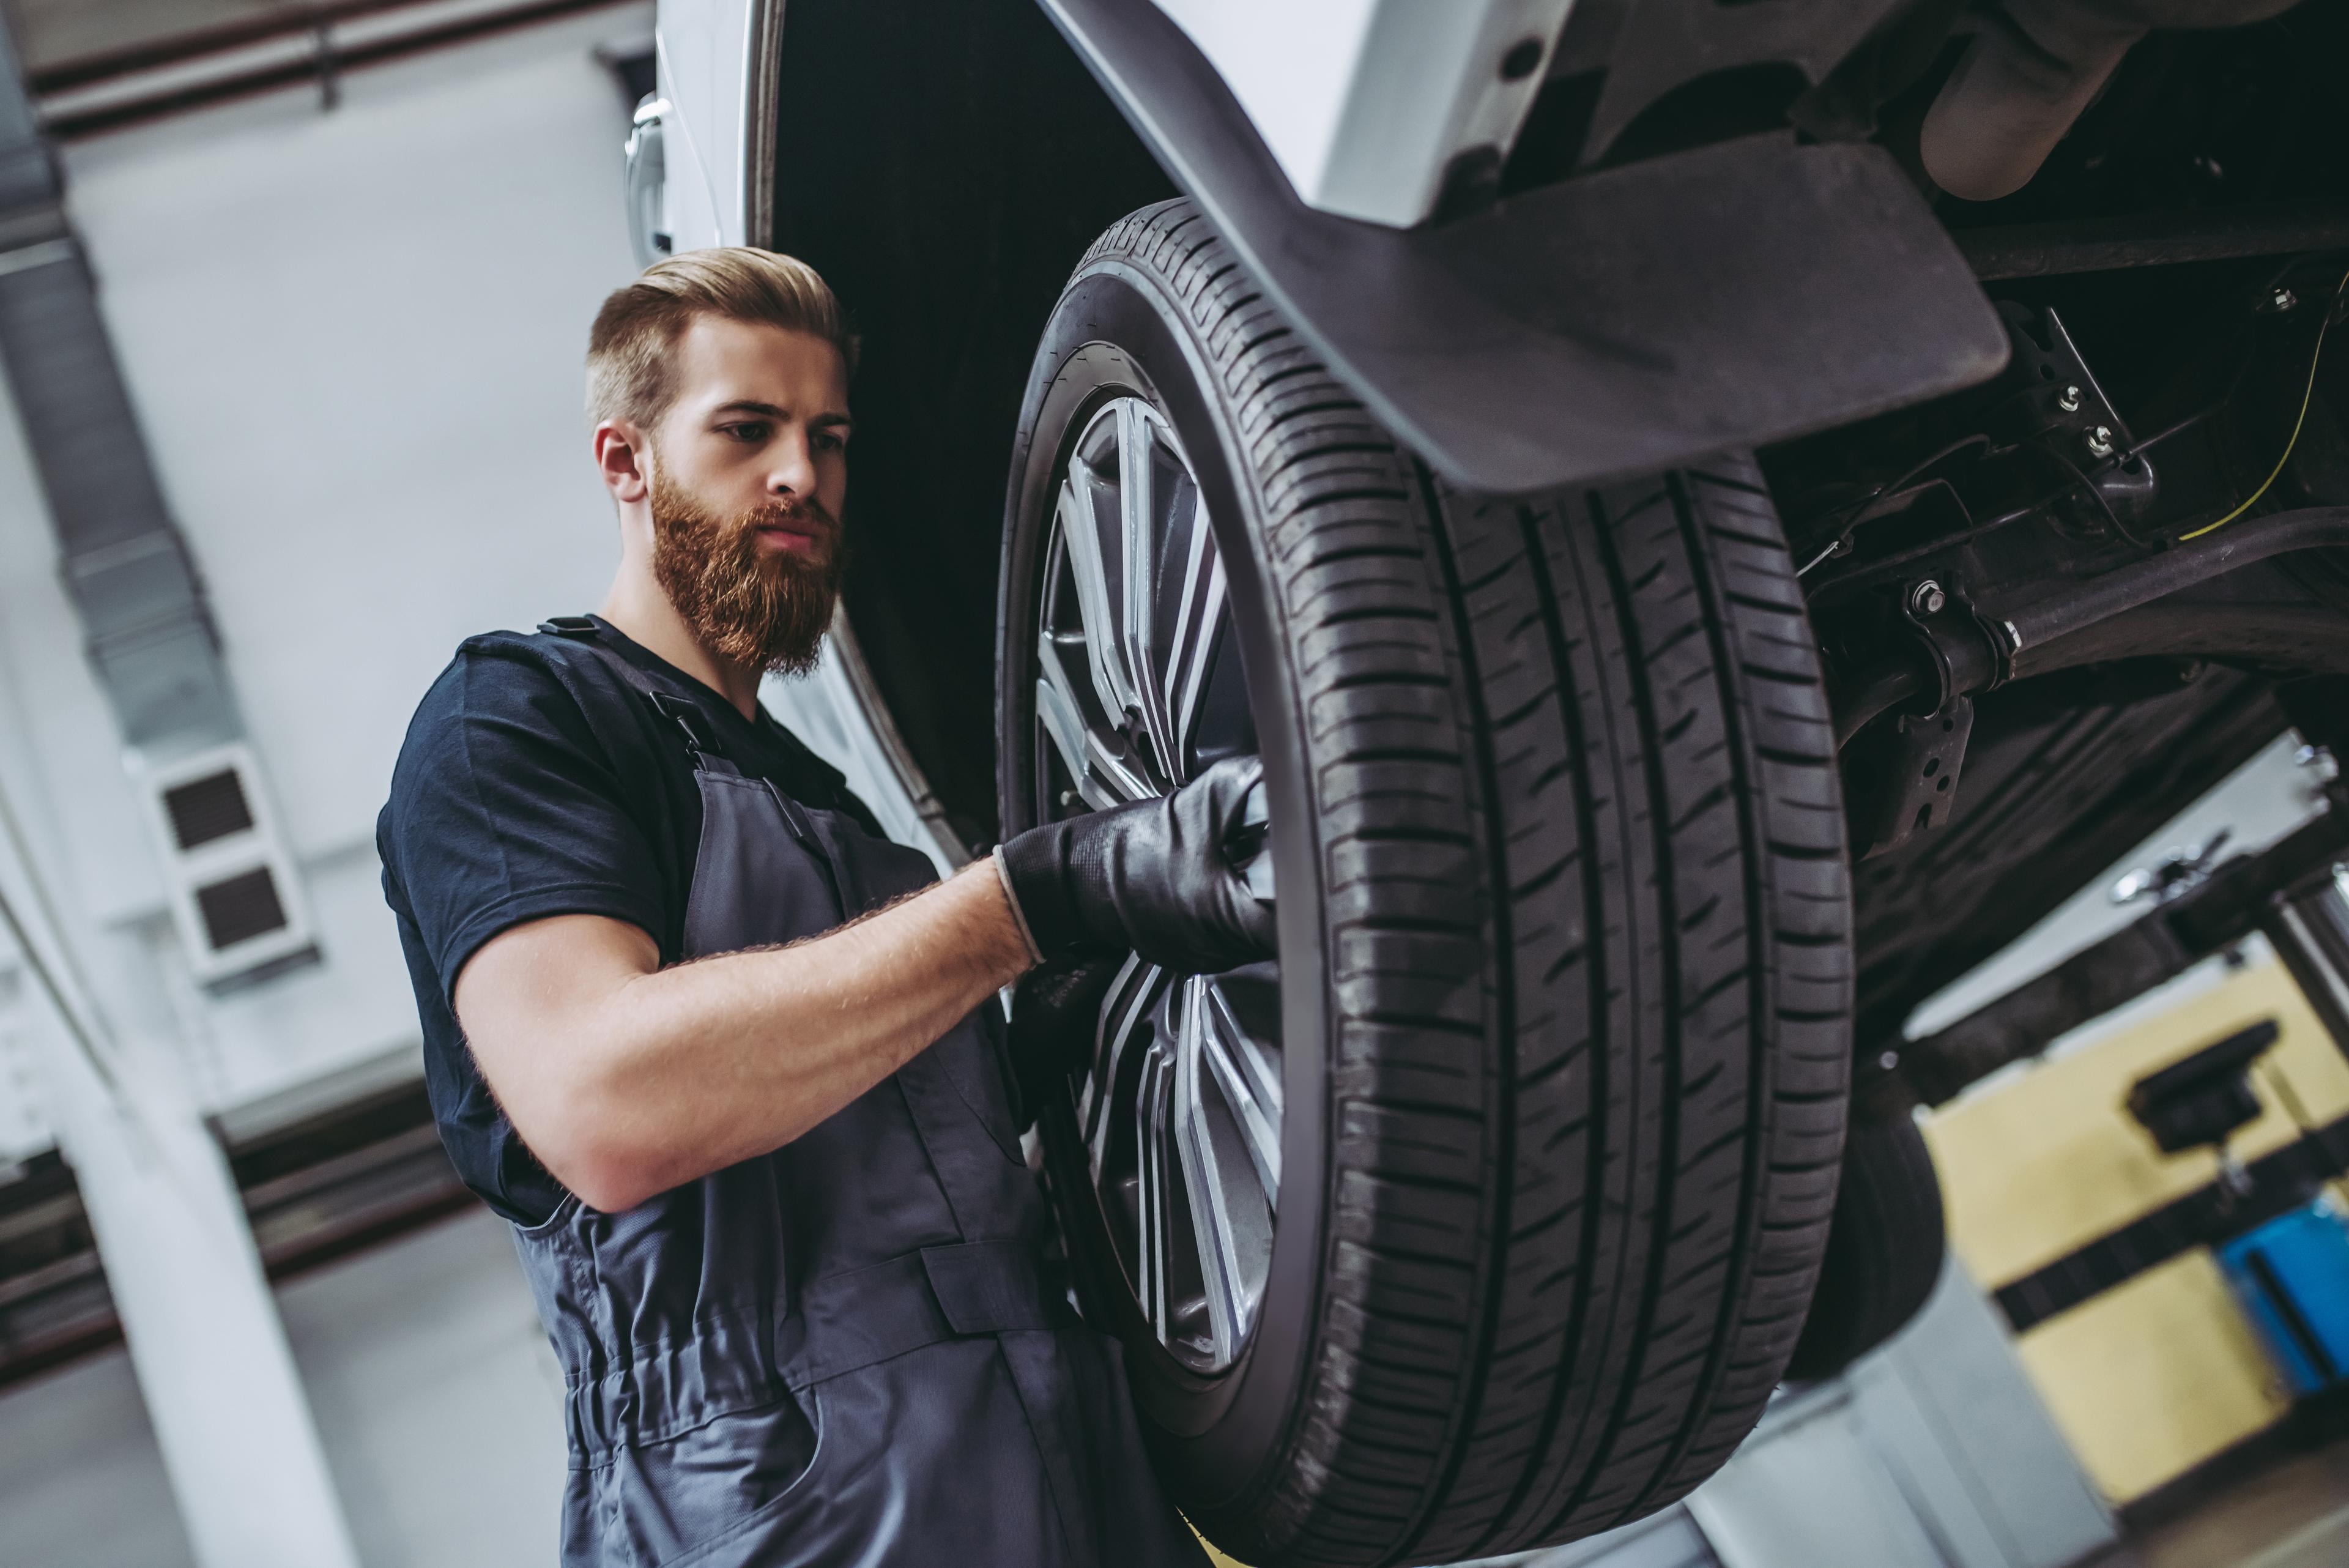 Mechanic readies cars for spring excursions with tire changes.